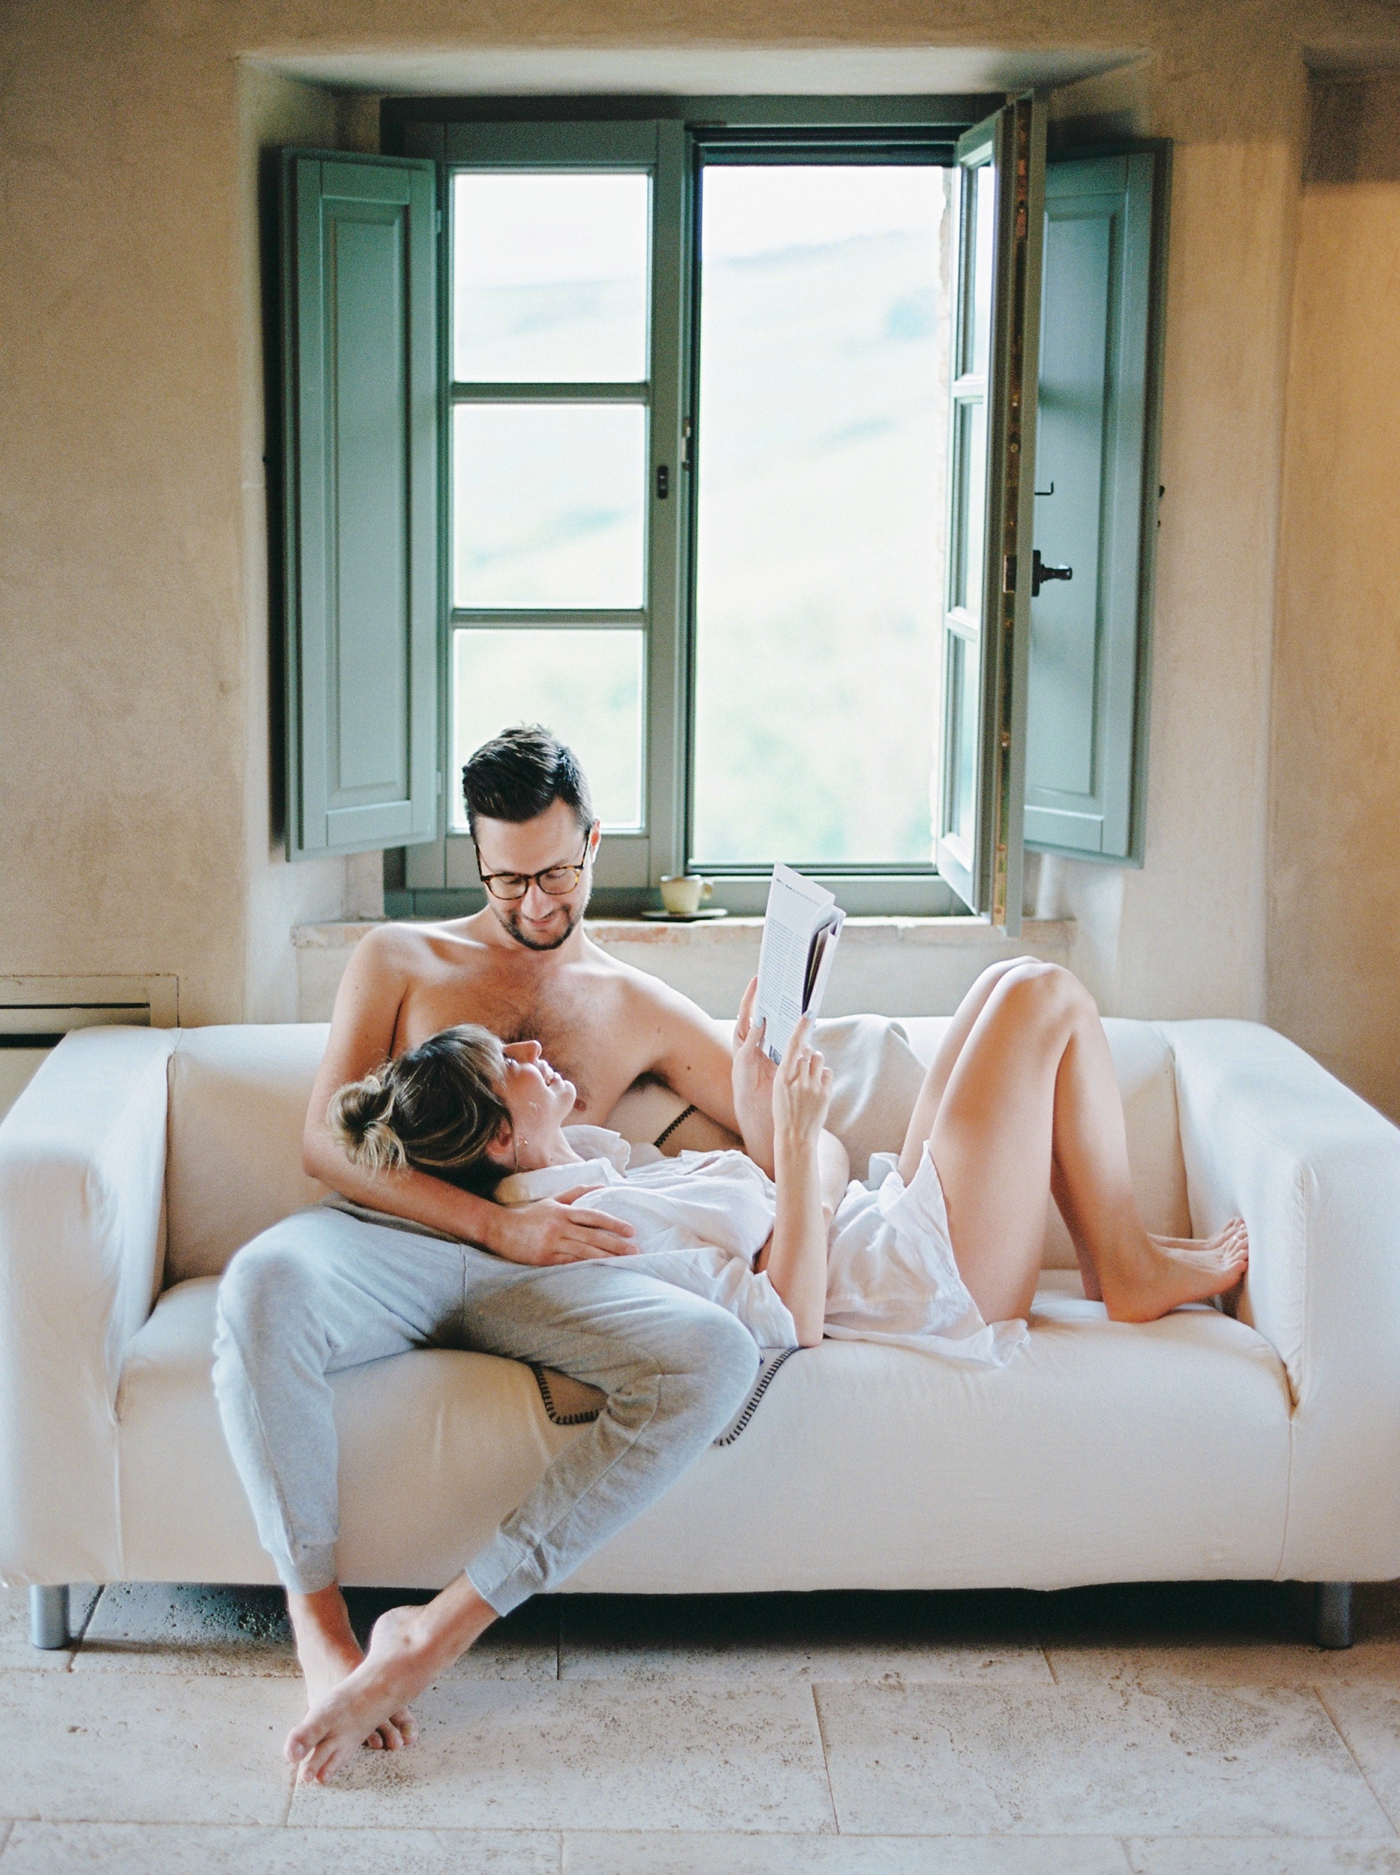 In home lifestyle session | Luxury villa in tuscany italy | fine art film wedding photographer justine milton | travel and fashion blogger